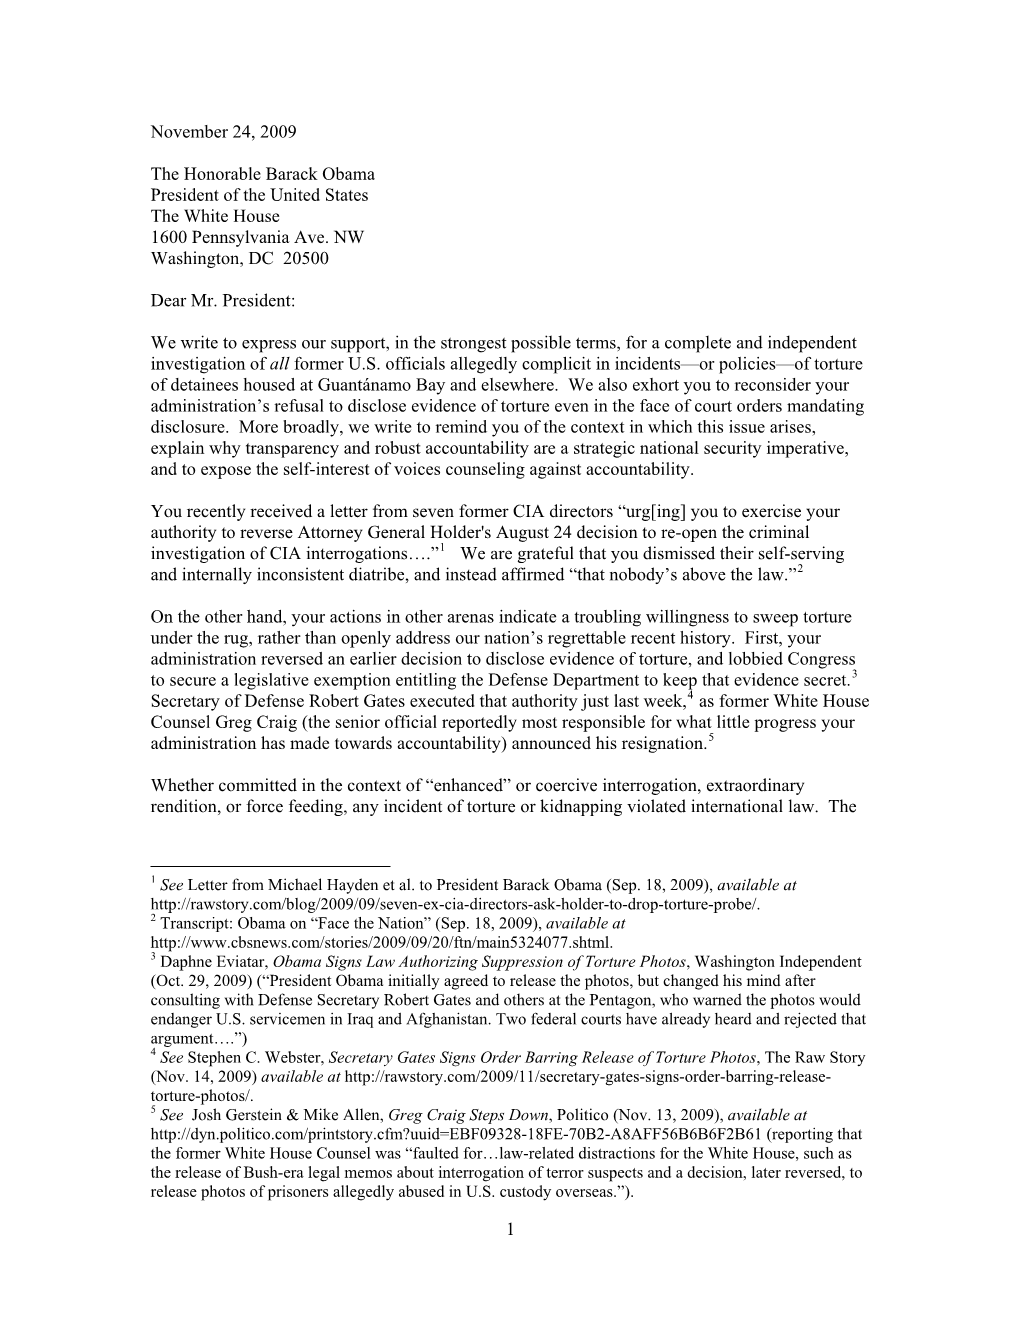 Coalition Letter to President Obama on Torture and Transparency